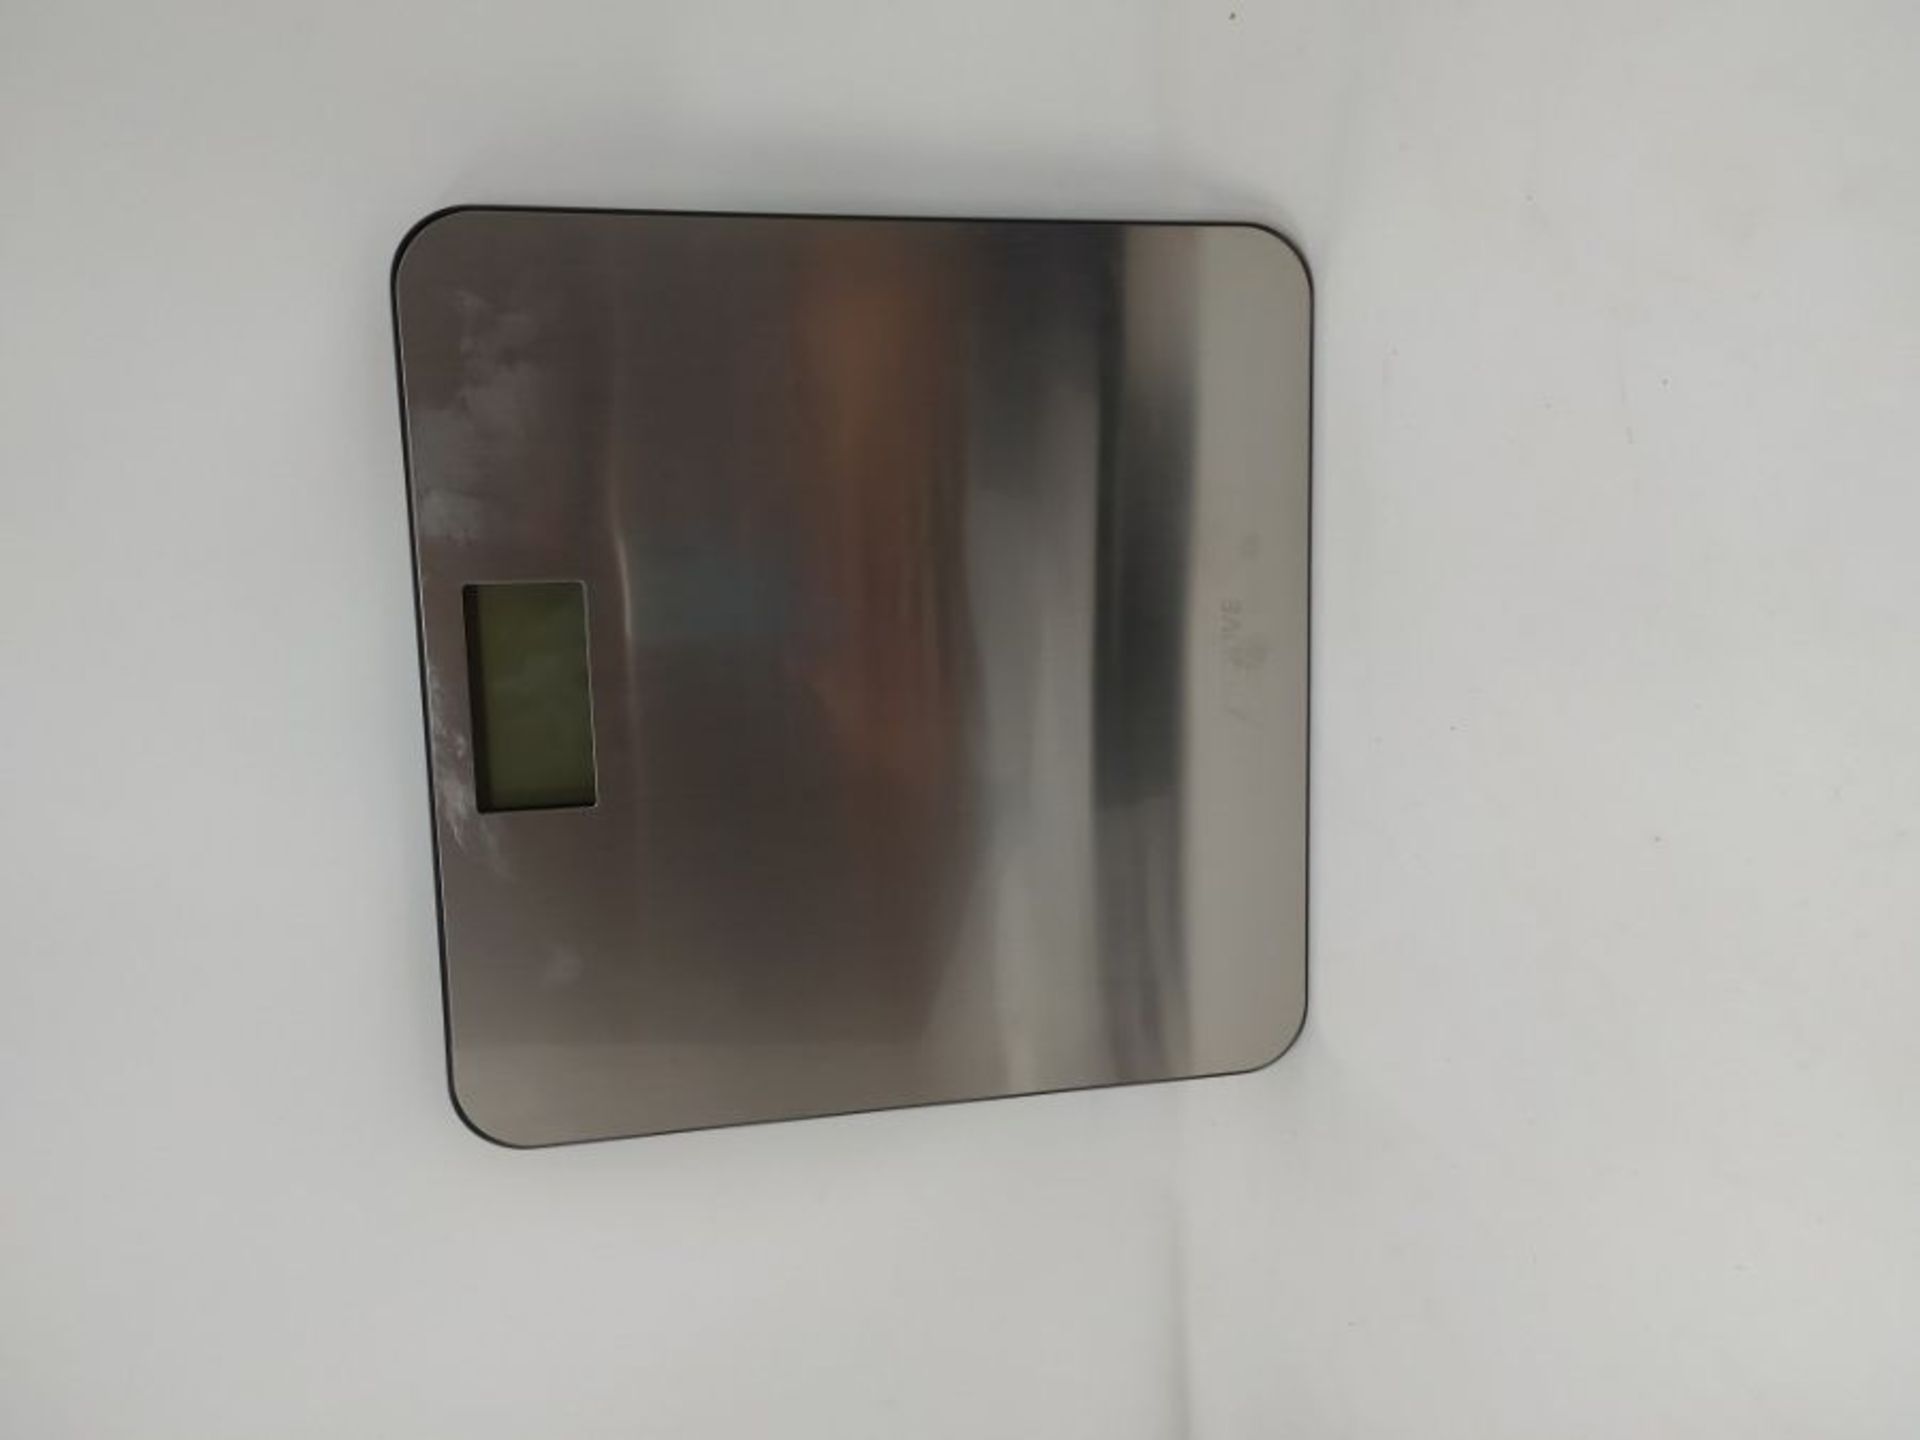 Active EraÂ® Ultra Slim Digital Bathroom Scales with High Precision Sensors - Stainl - Image 2 of 2